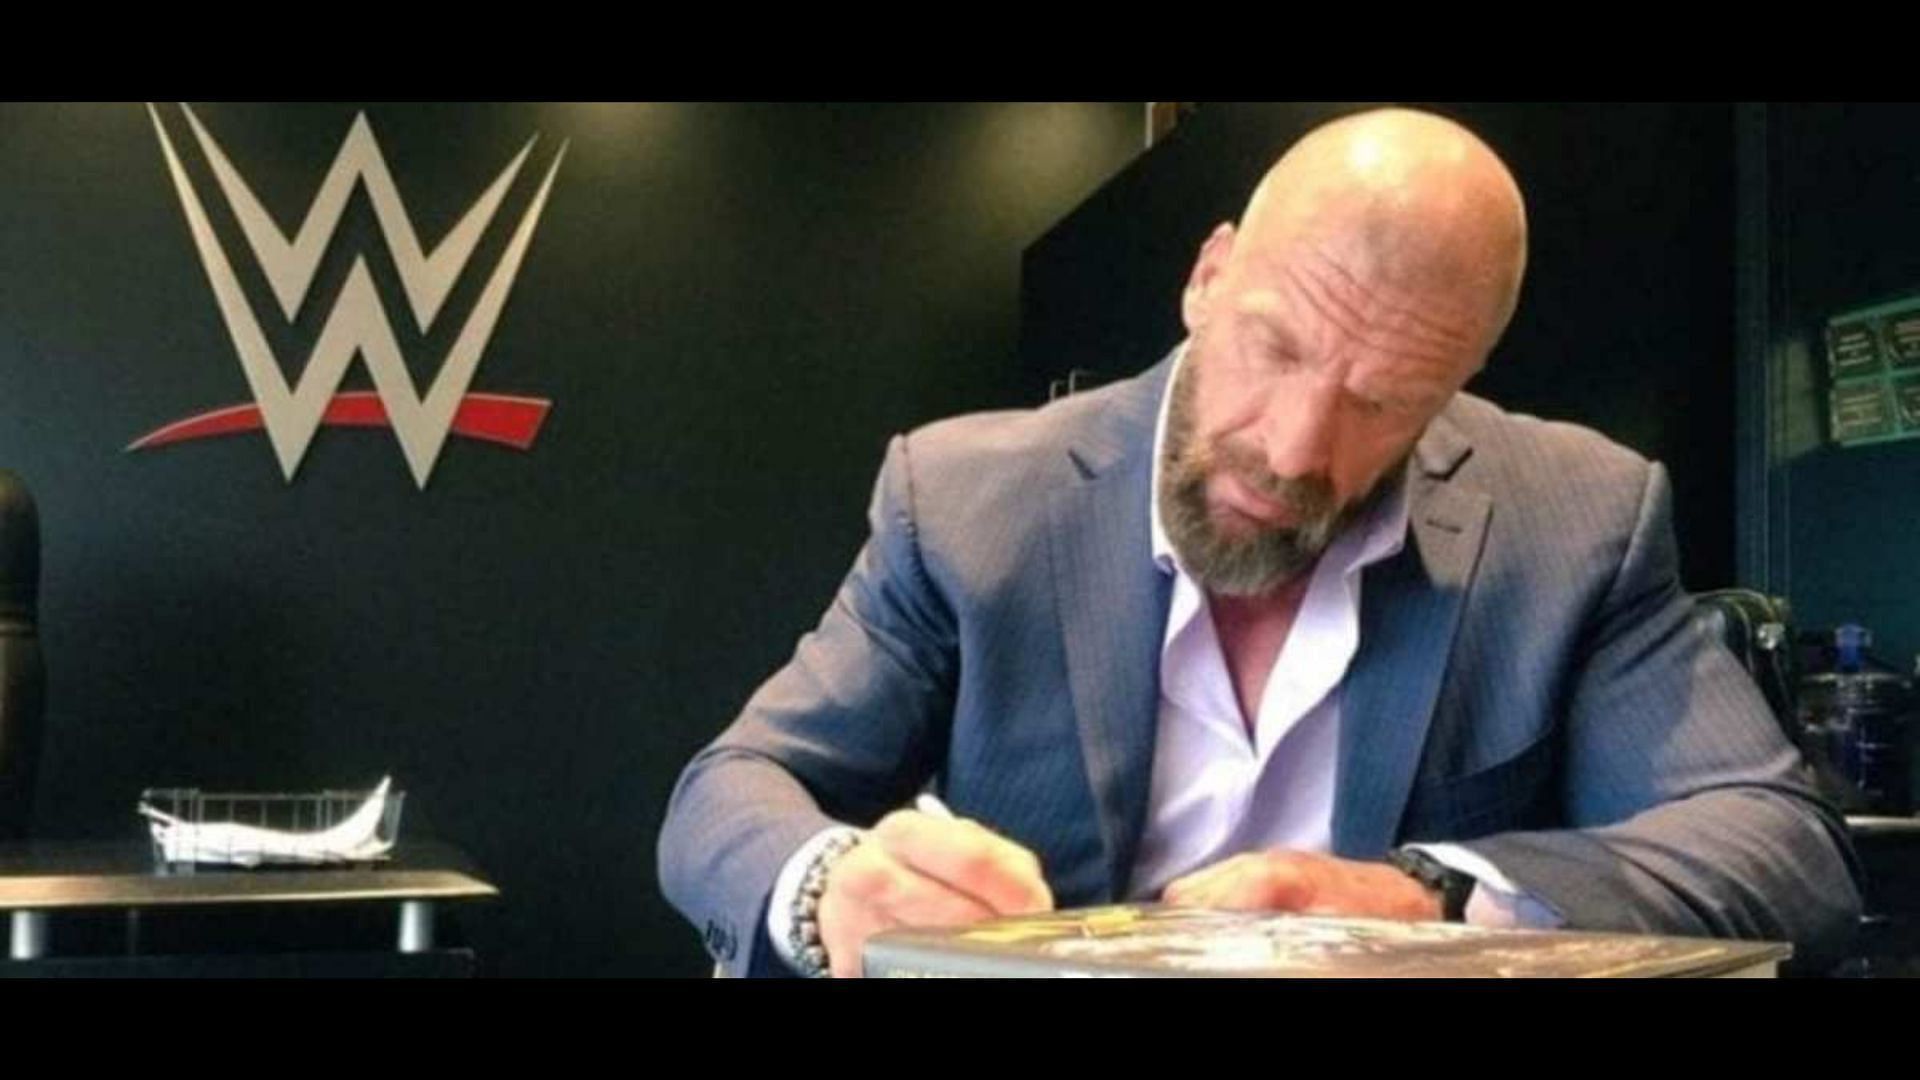 Triple H offered former champion creative freedom prior to the superstar